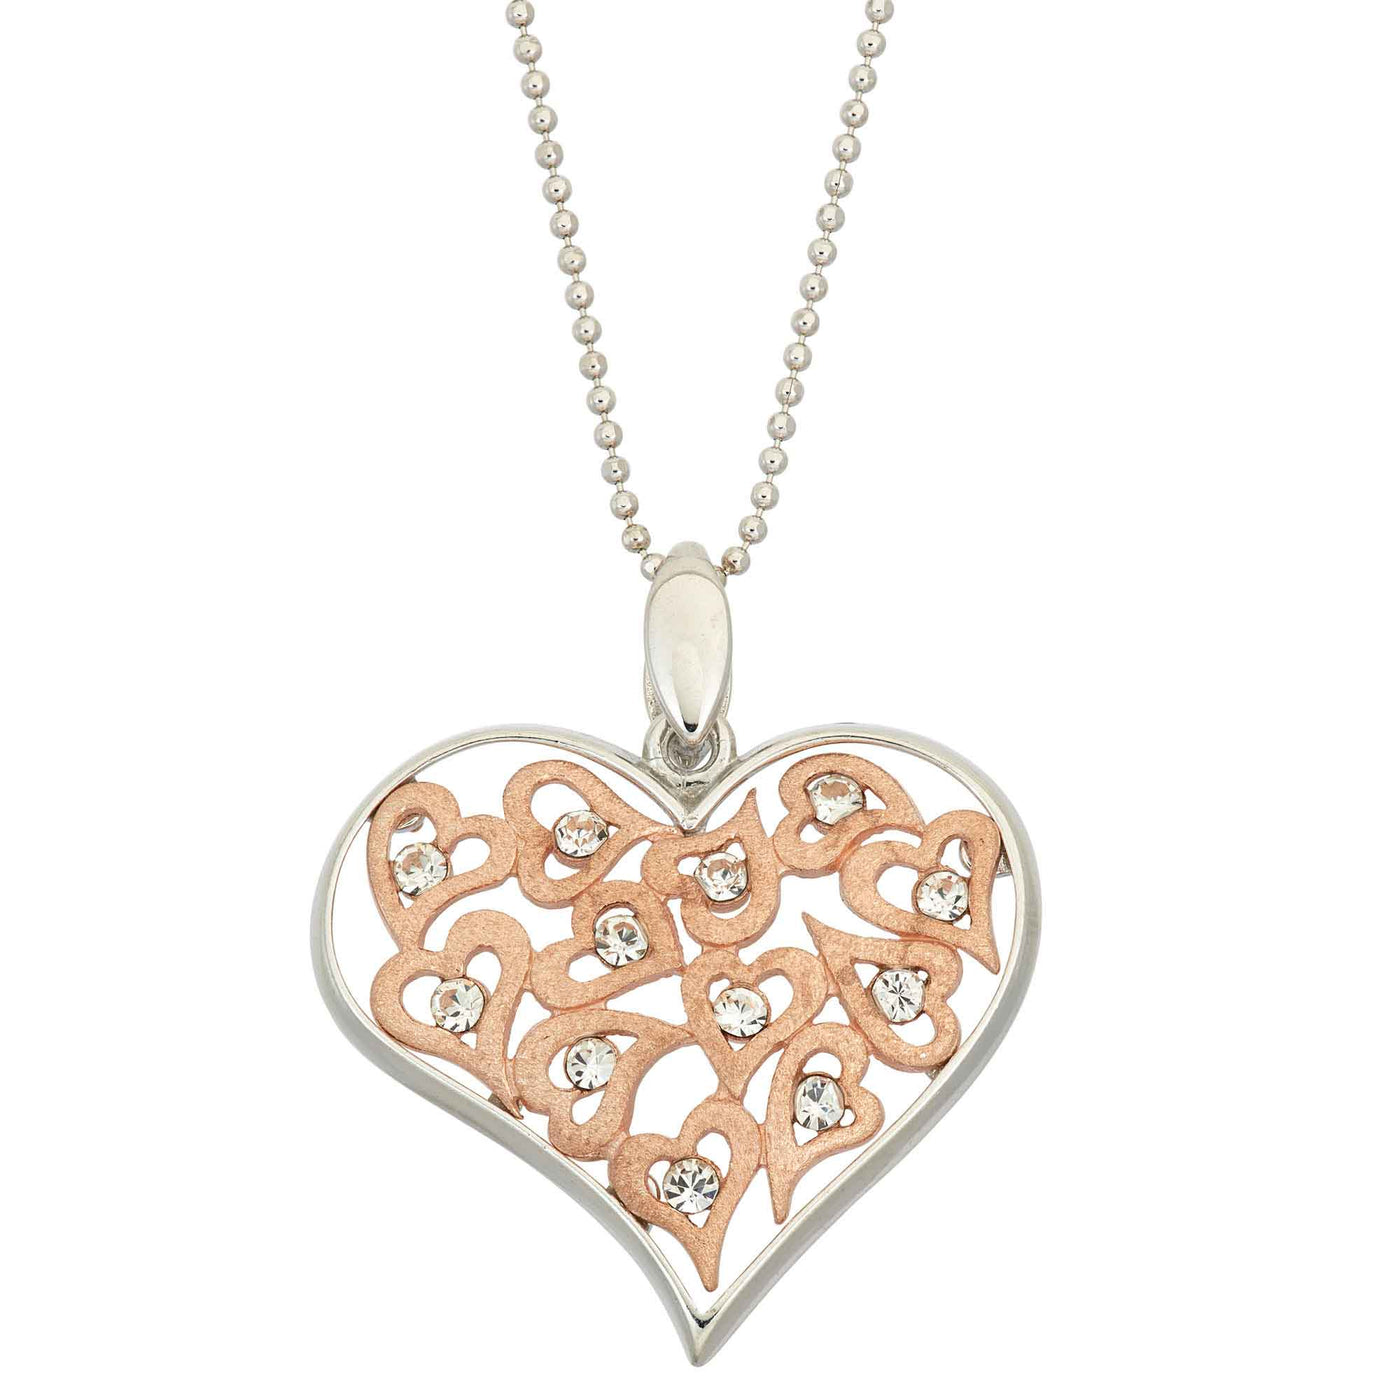 Rebecca Sloane Rose Gold Silver Heart With White Crystal Pendant